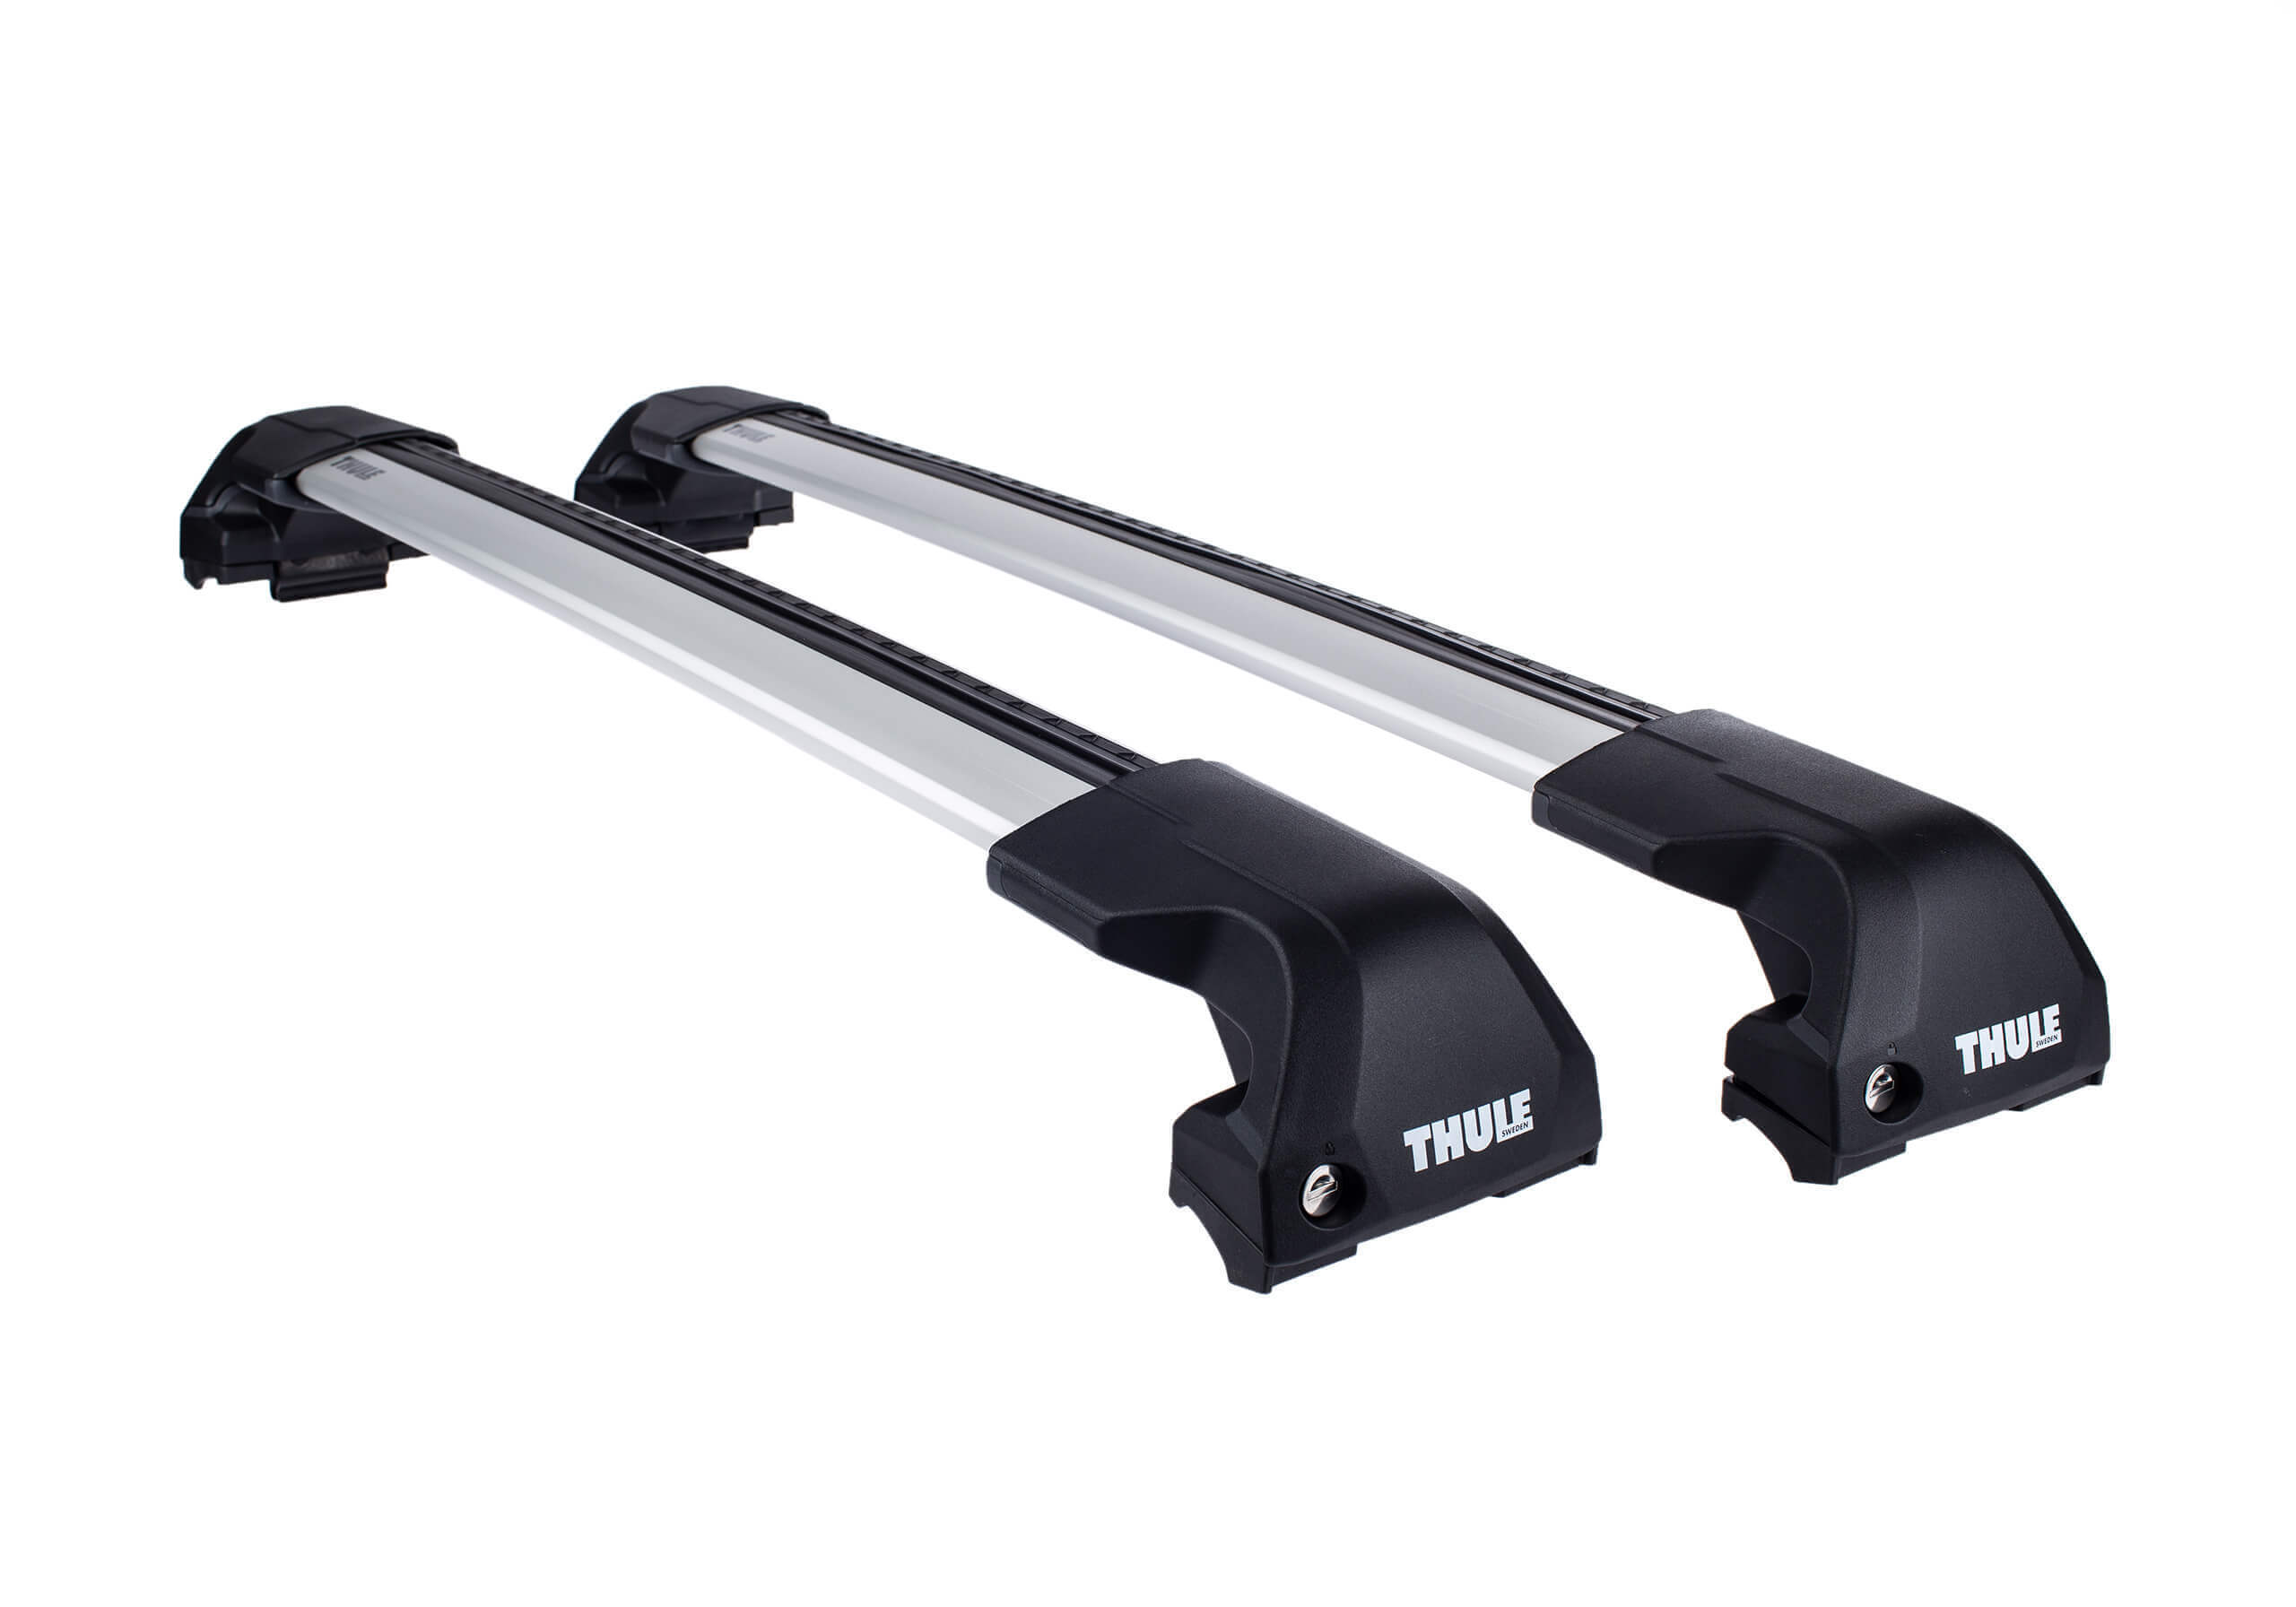 BMW X5 (2007 to 2013):Thule Edge silver WingBars package - 7206, 7214 x 2, 6146